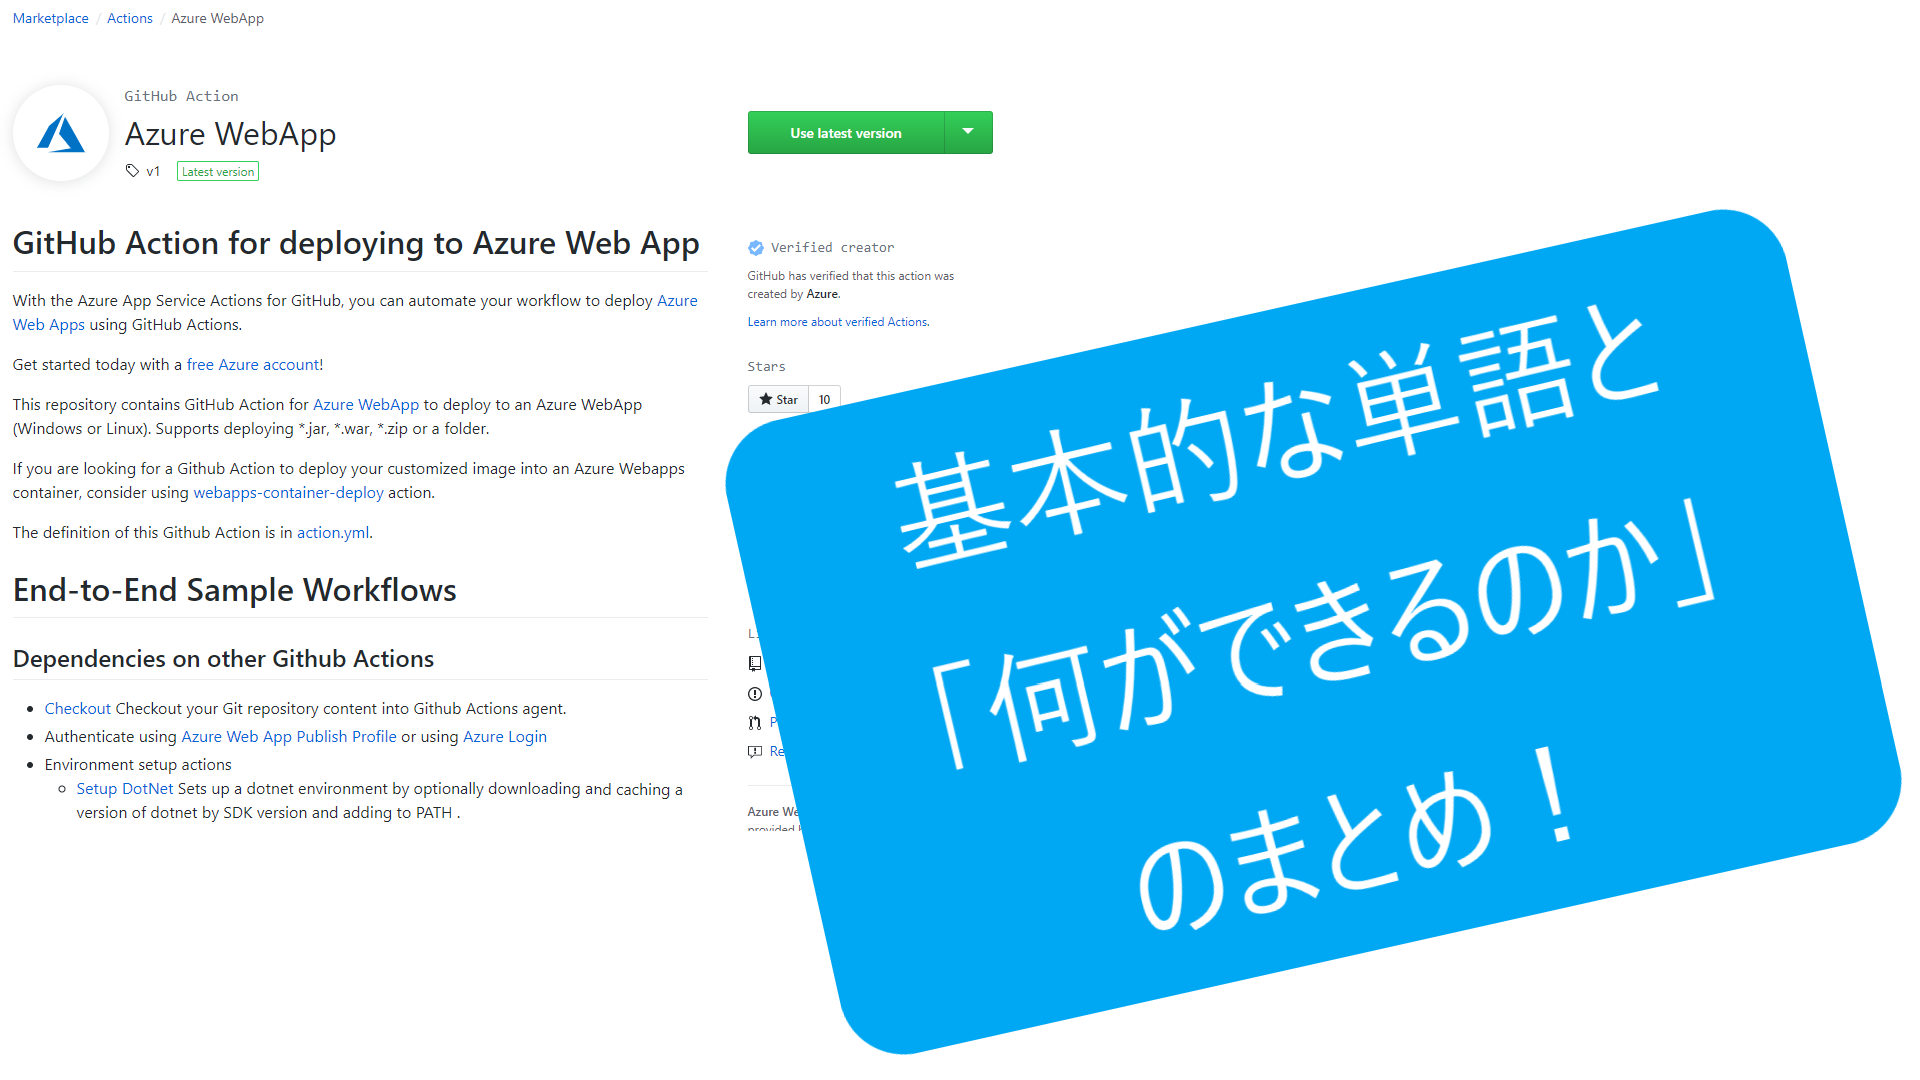 azblob://2022/11/11/eyecatch/2019-12-23-what-can-we-do-with-github-actions-for-azure-000.png